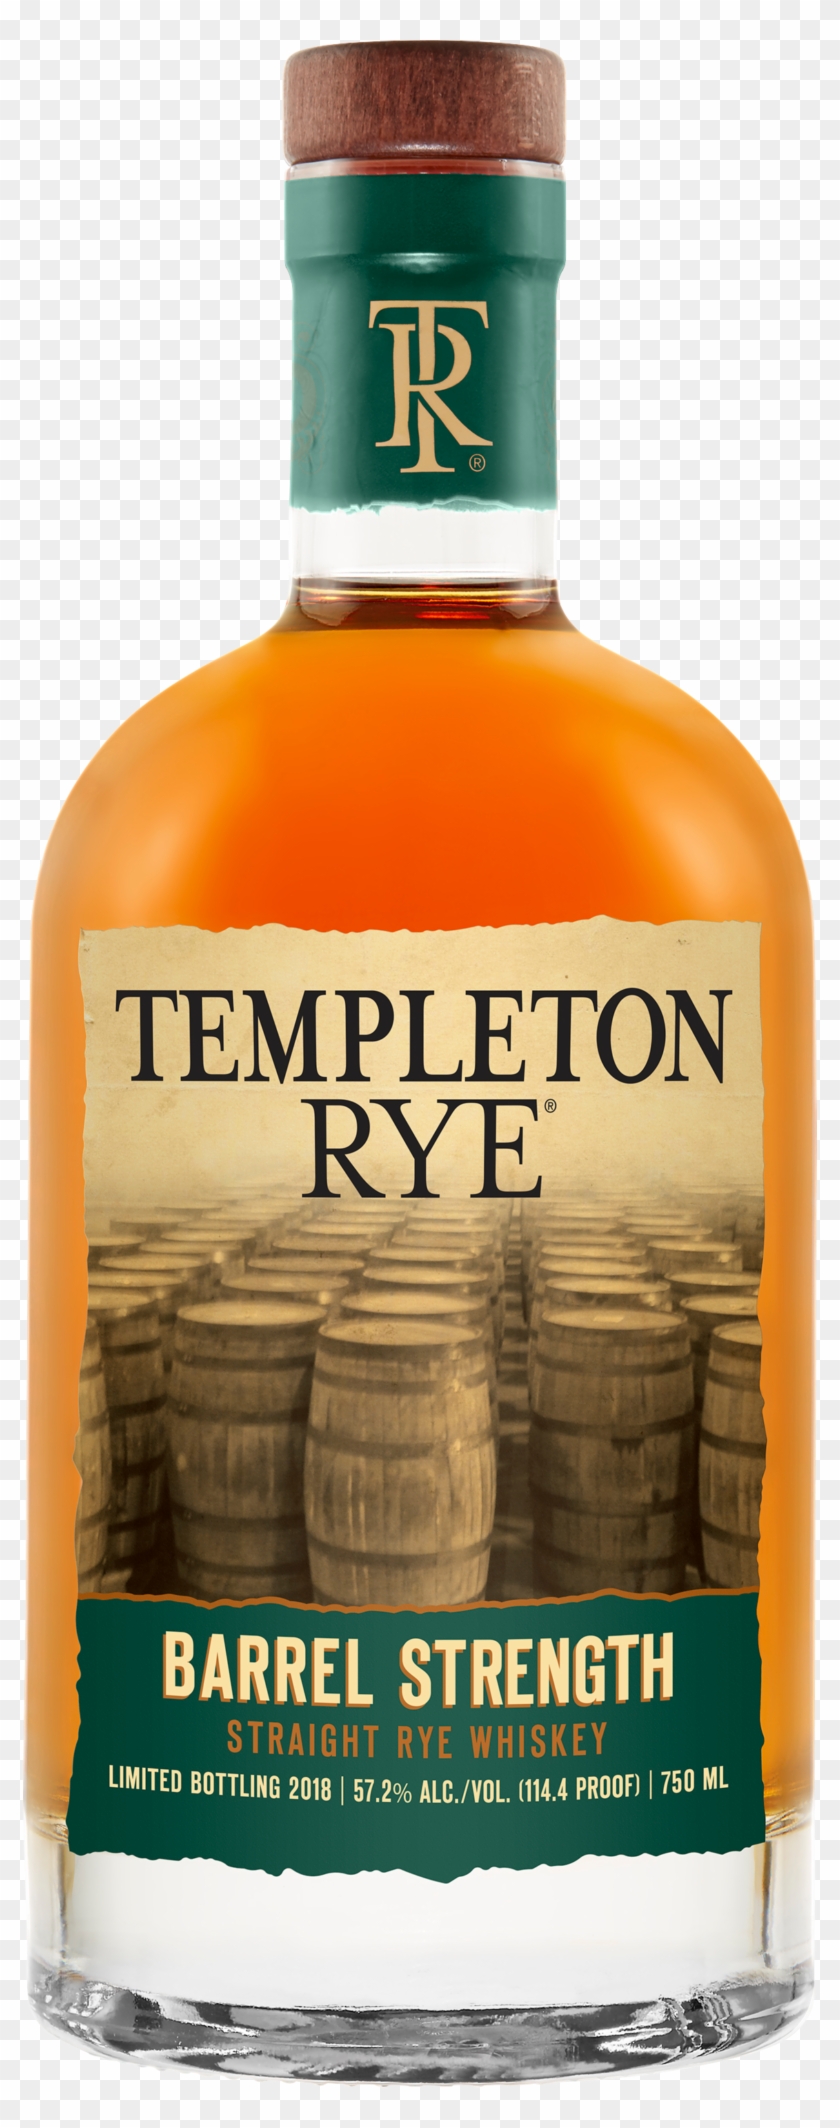 That Artful Use Of Selective Truth Is Grandly On Display - Templeton Rye Barrel Strength Clipart #3146786